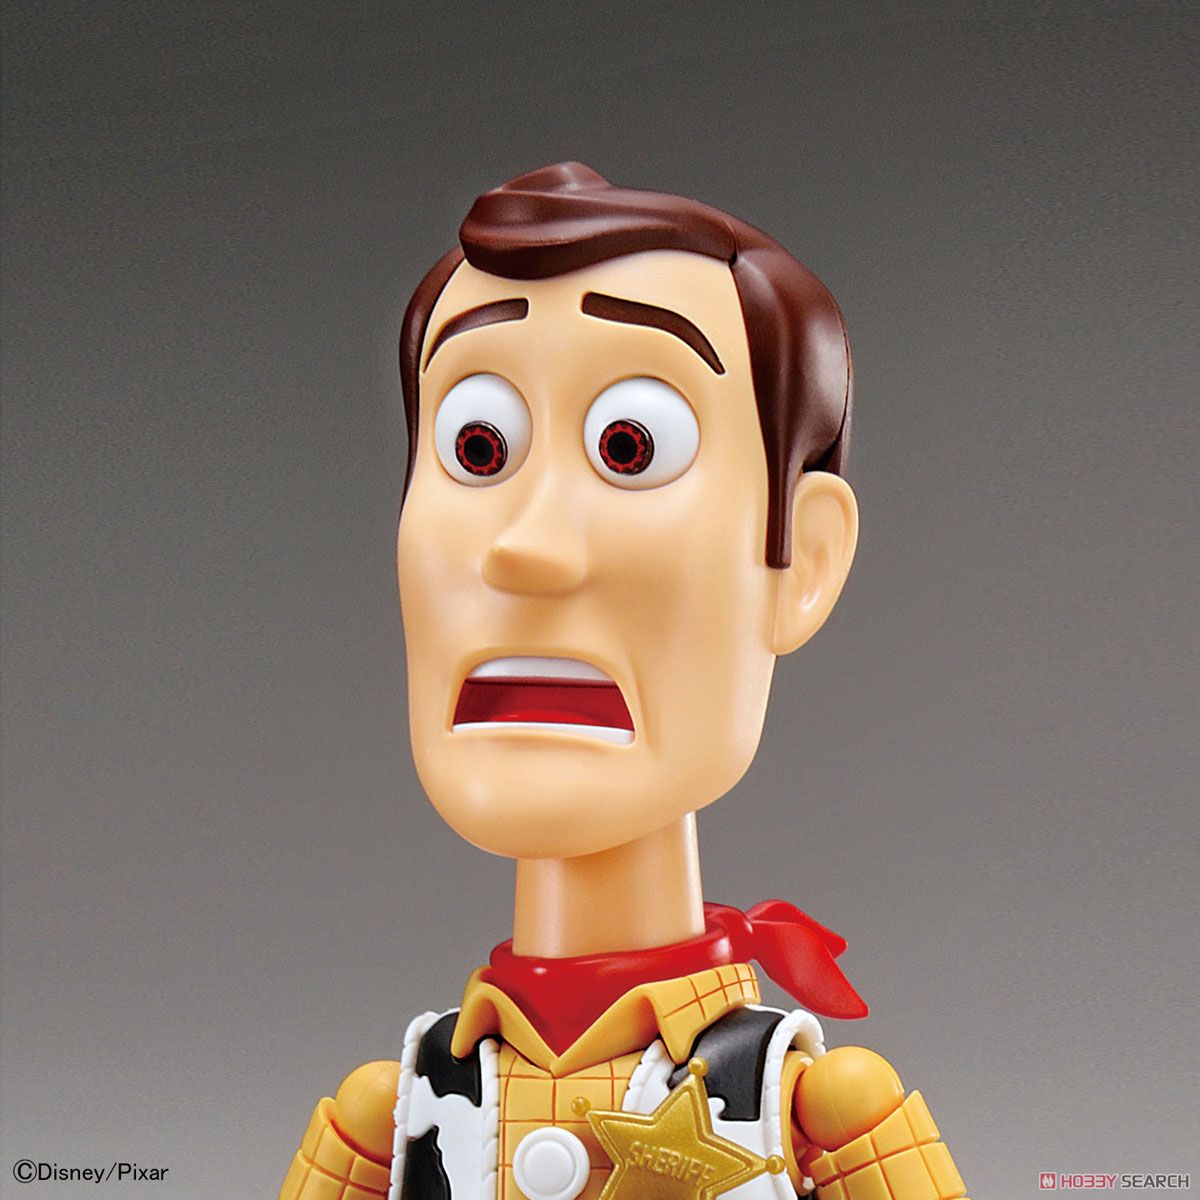 Toy Story 4 Woody